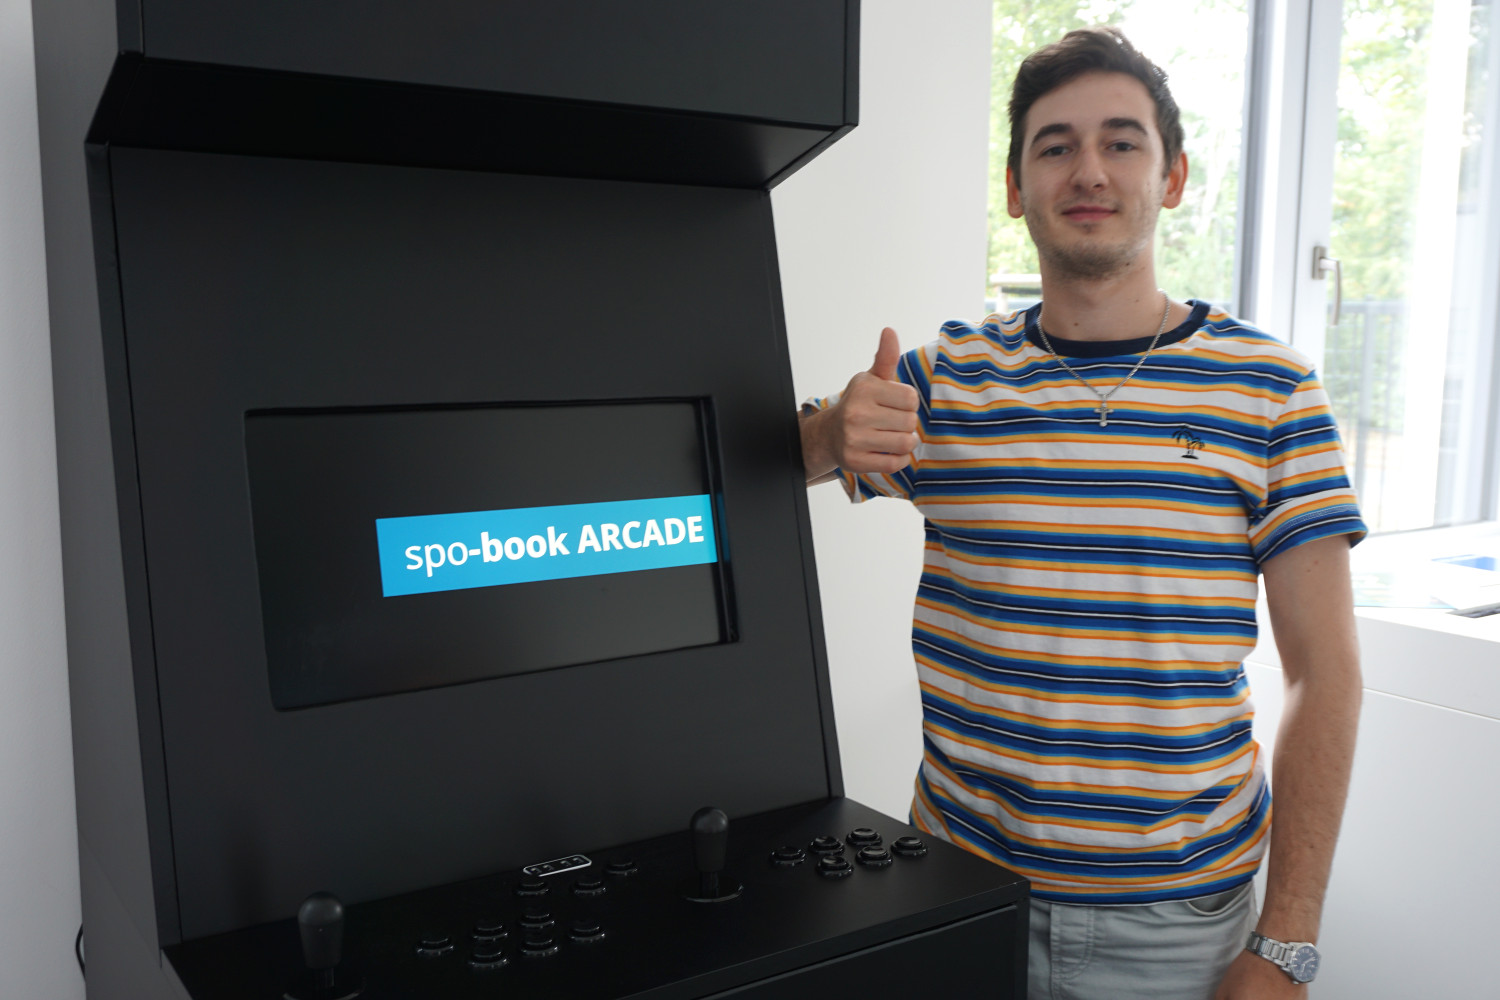 spo-comm gaming? Our IT systems technician builds arcade machine